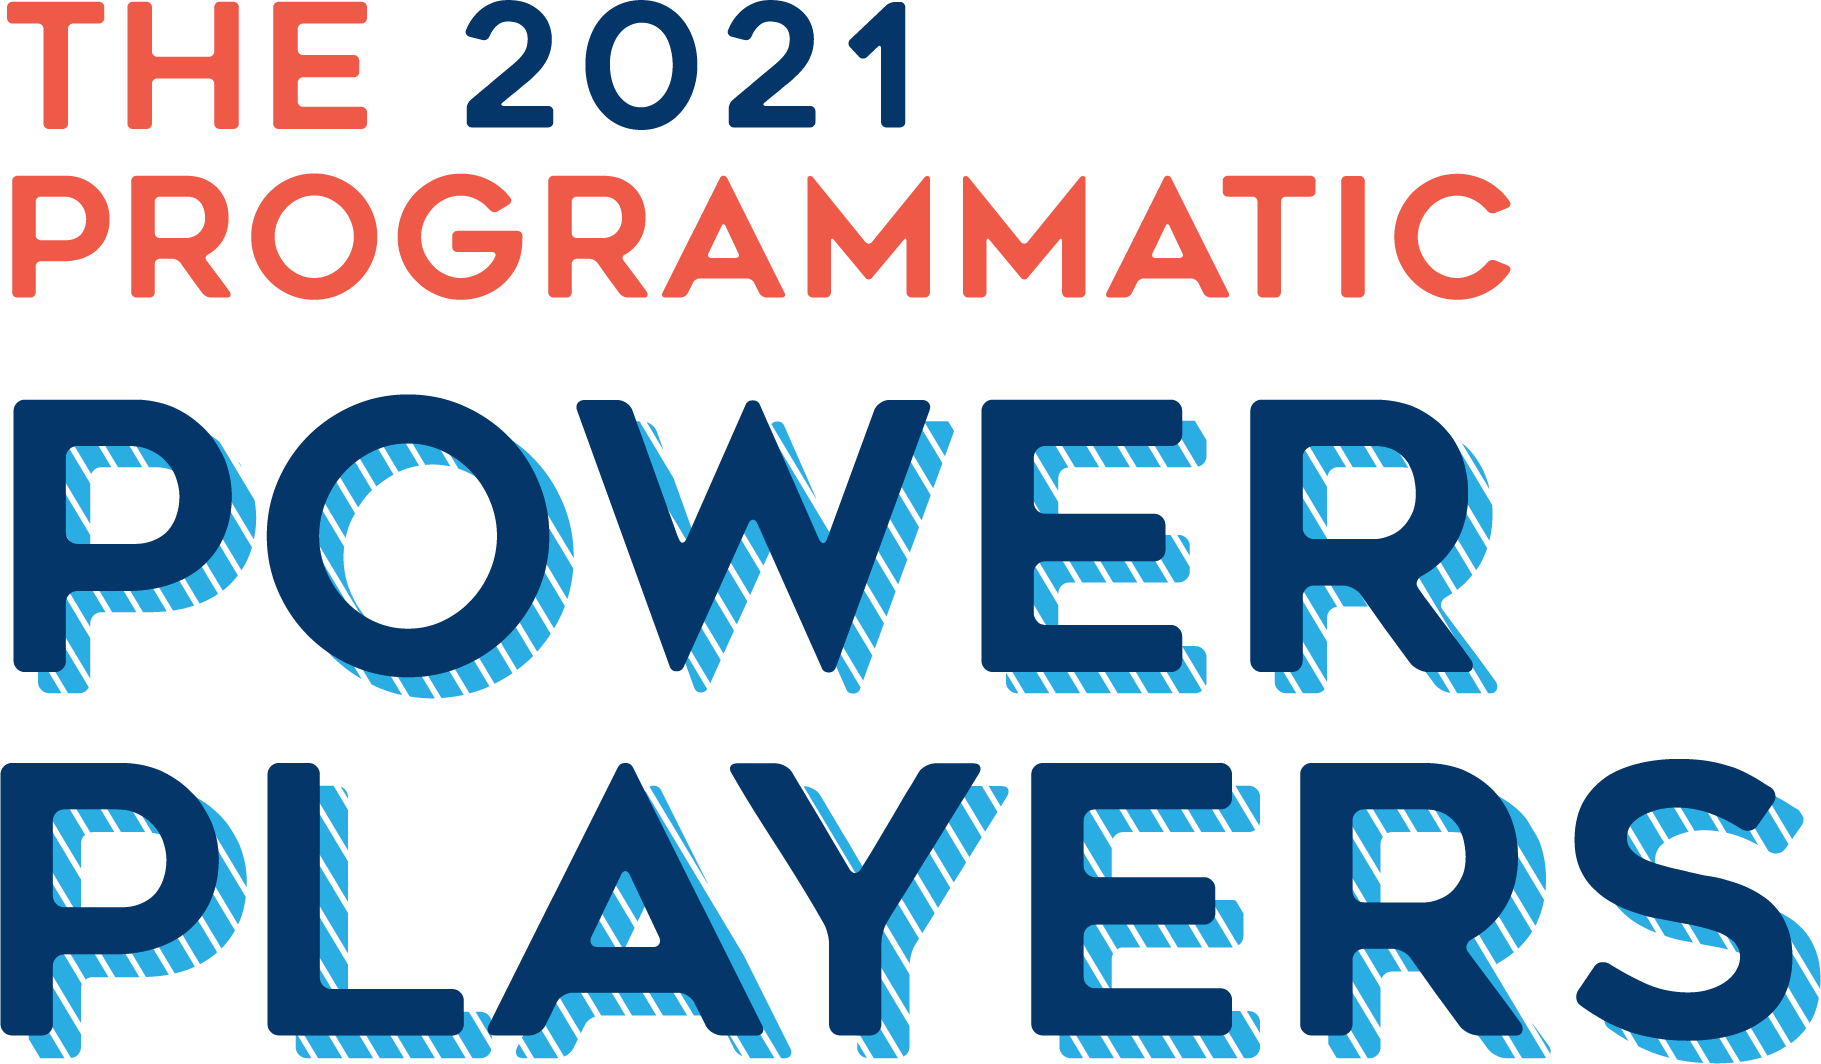 https://www.adexchanger.com/wp-content/uploads/2021/06/38263_AdEx_Power-Players-logo_21_stacked.png